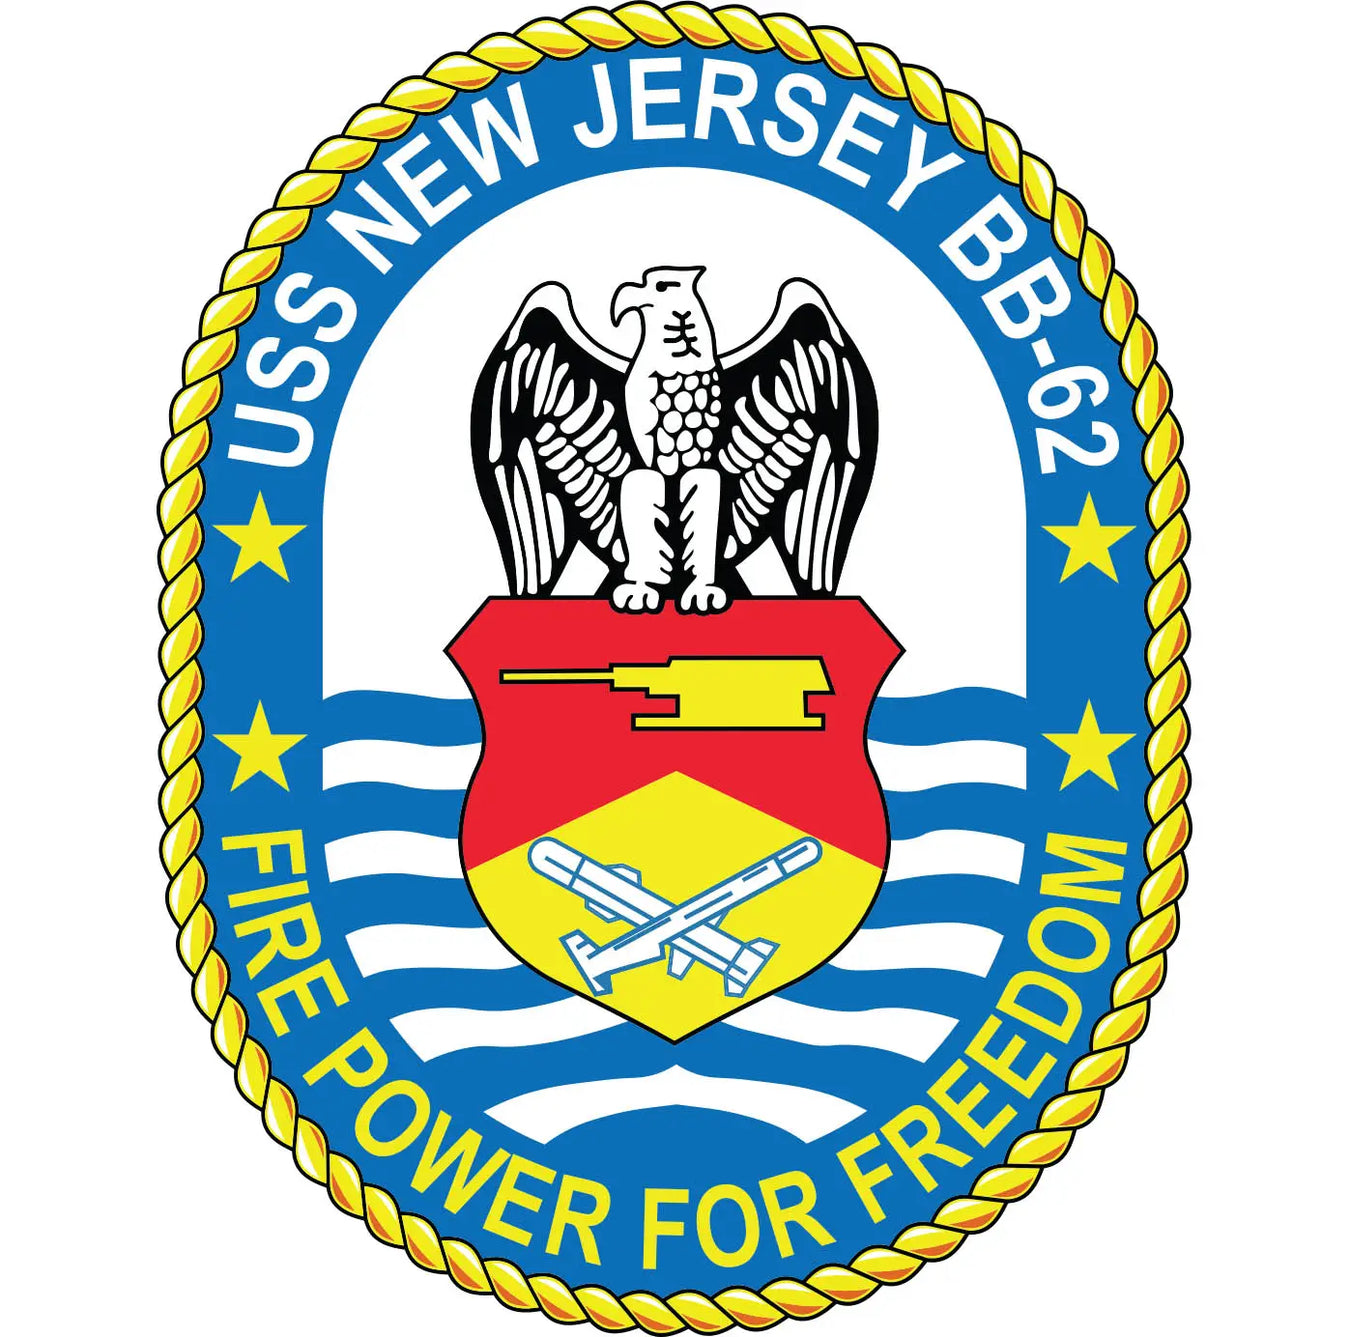 USS New Jersey (BB-62) Merchandise - Shop T-Shirts, hoodies, patches, pins, flags, decals, hats and more.